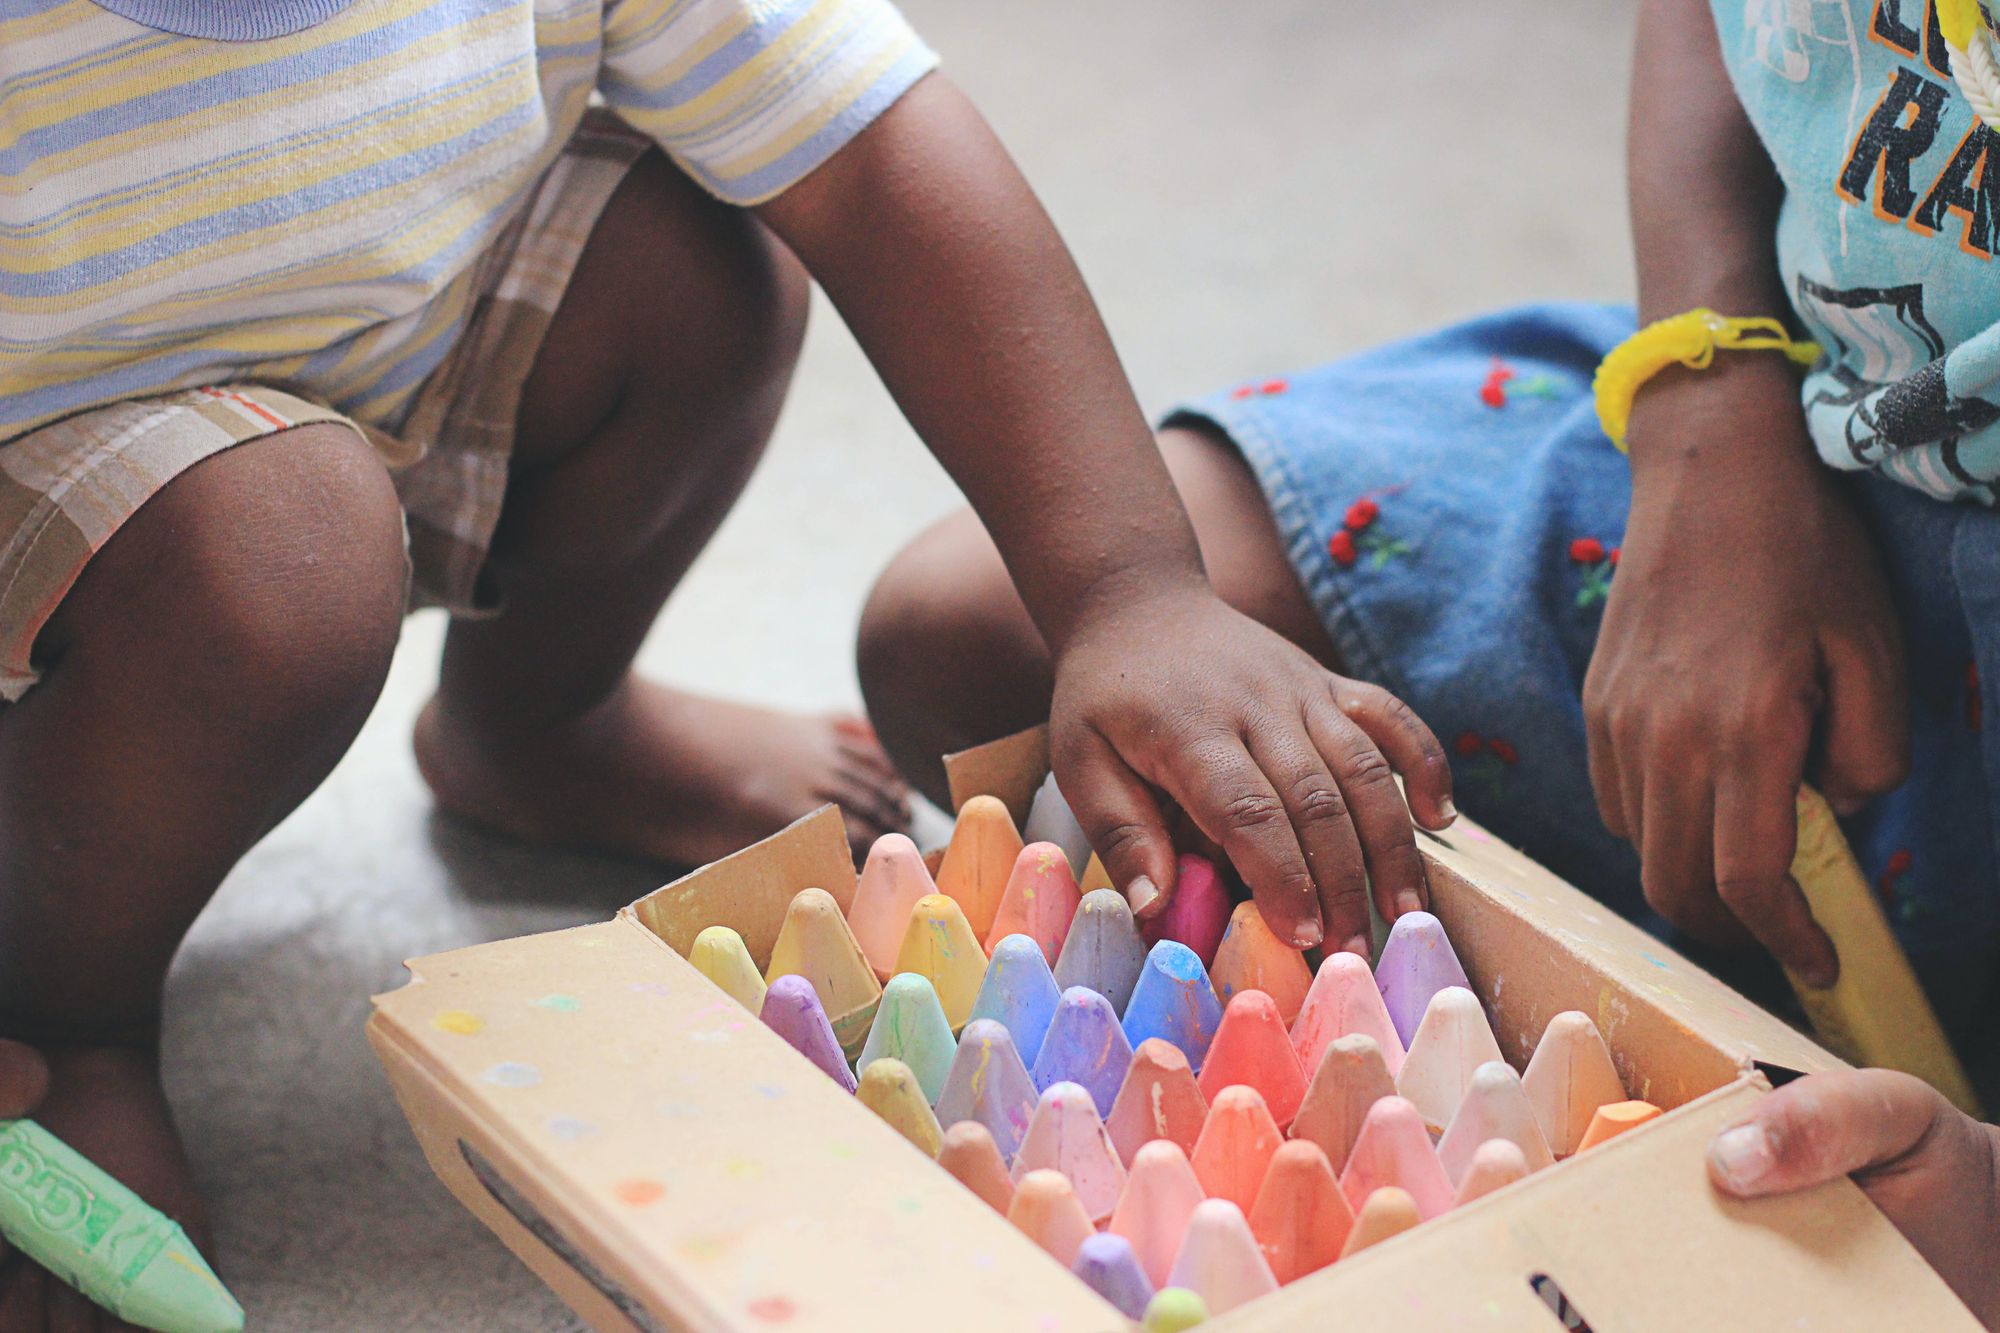 Children playing with coloring pencils